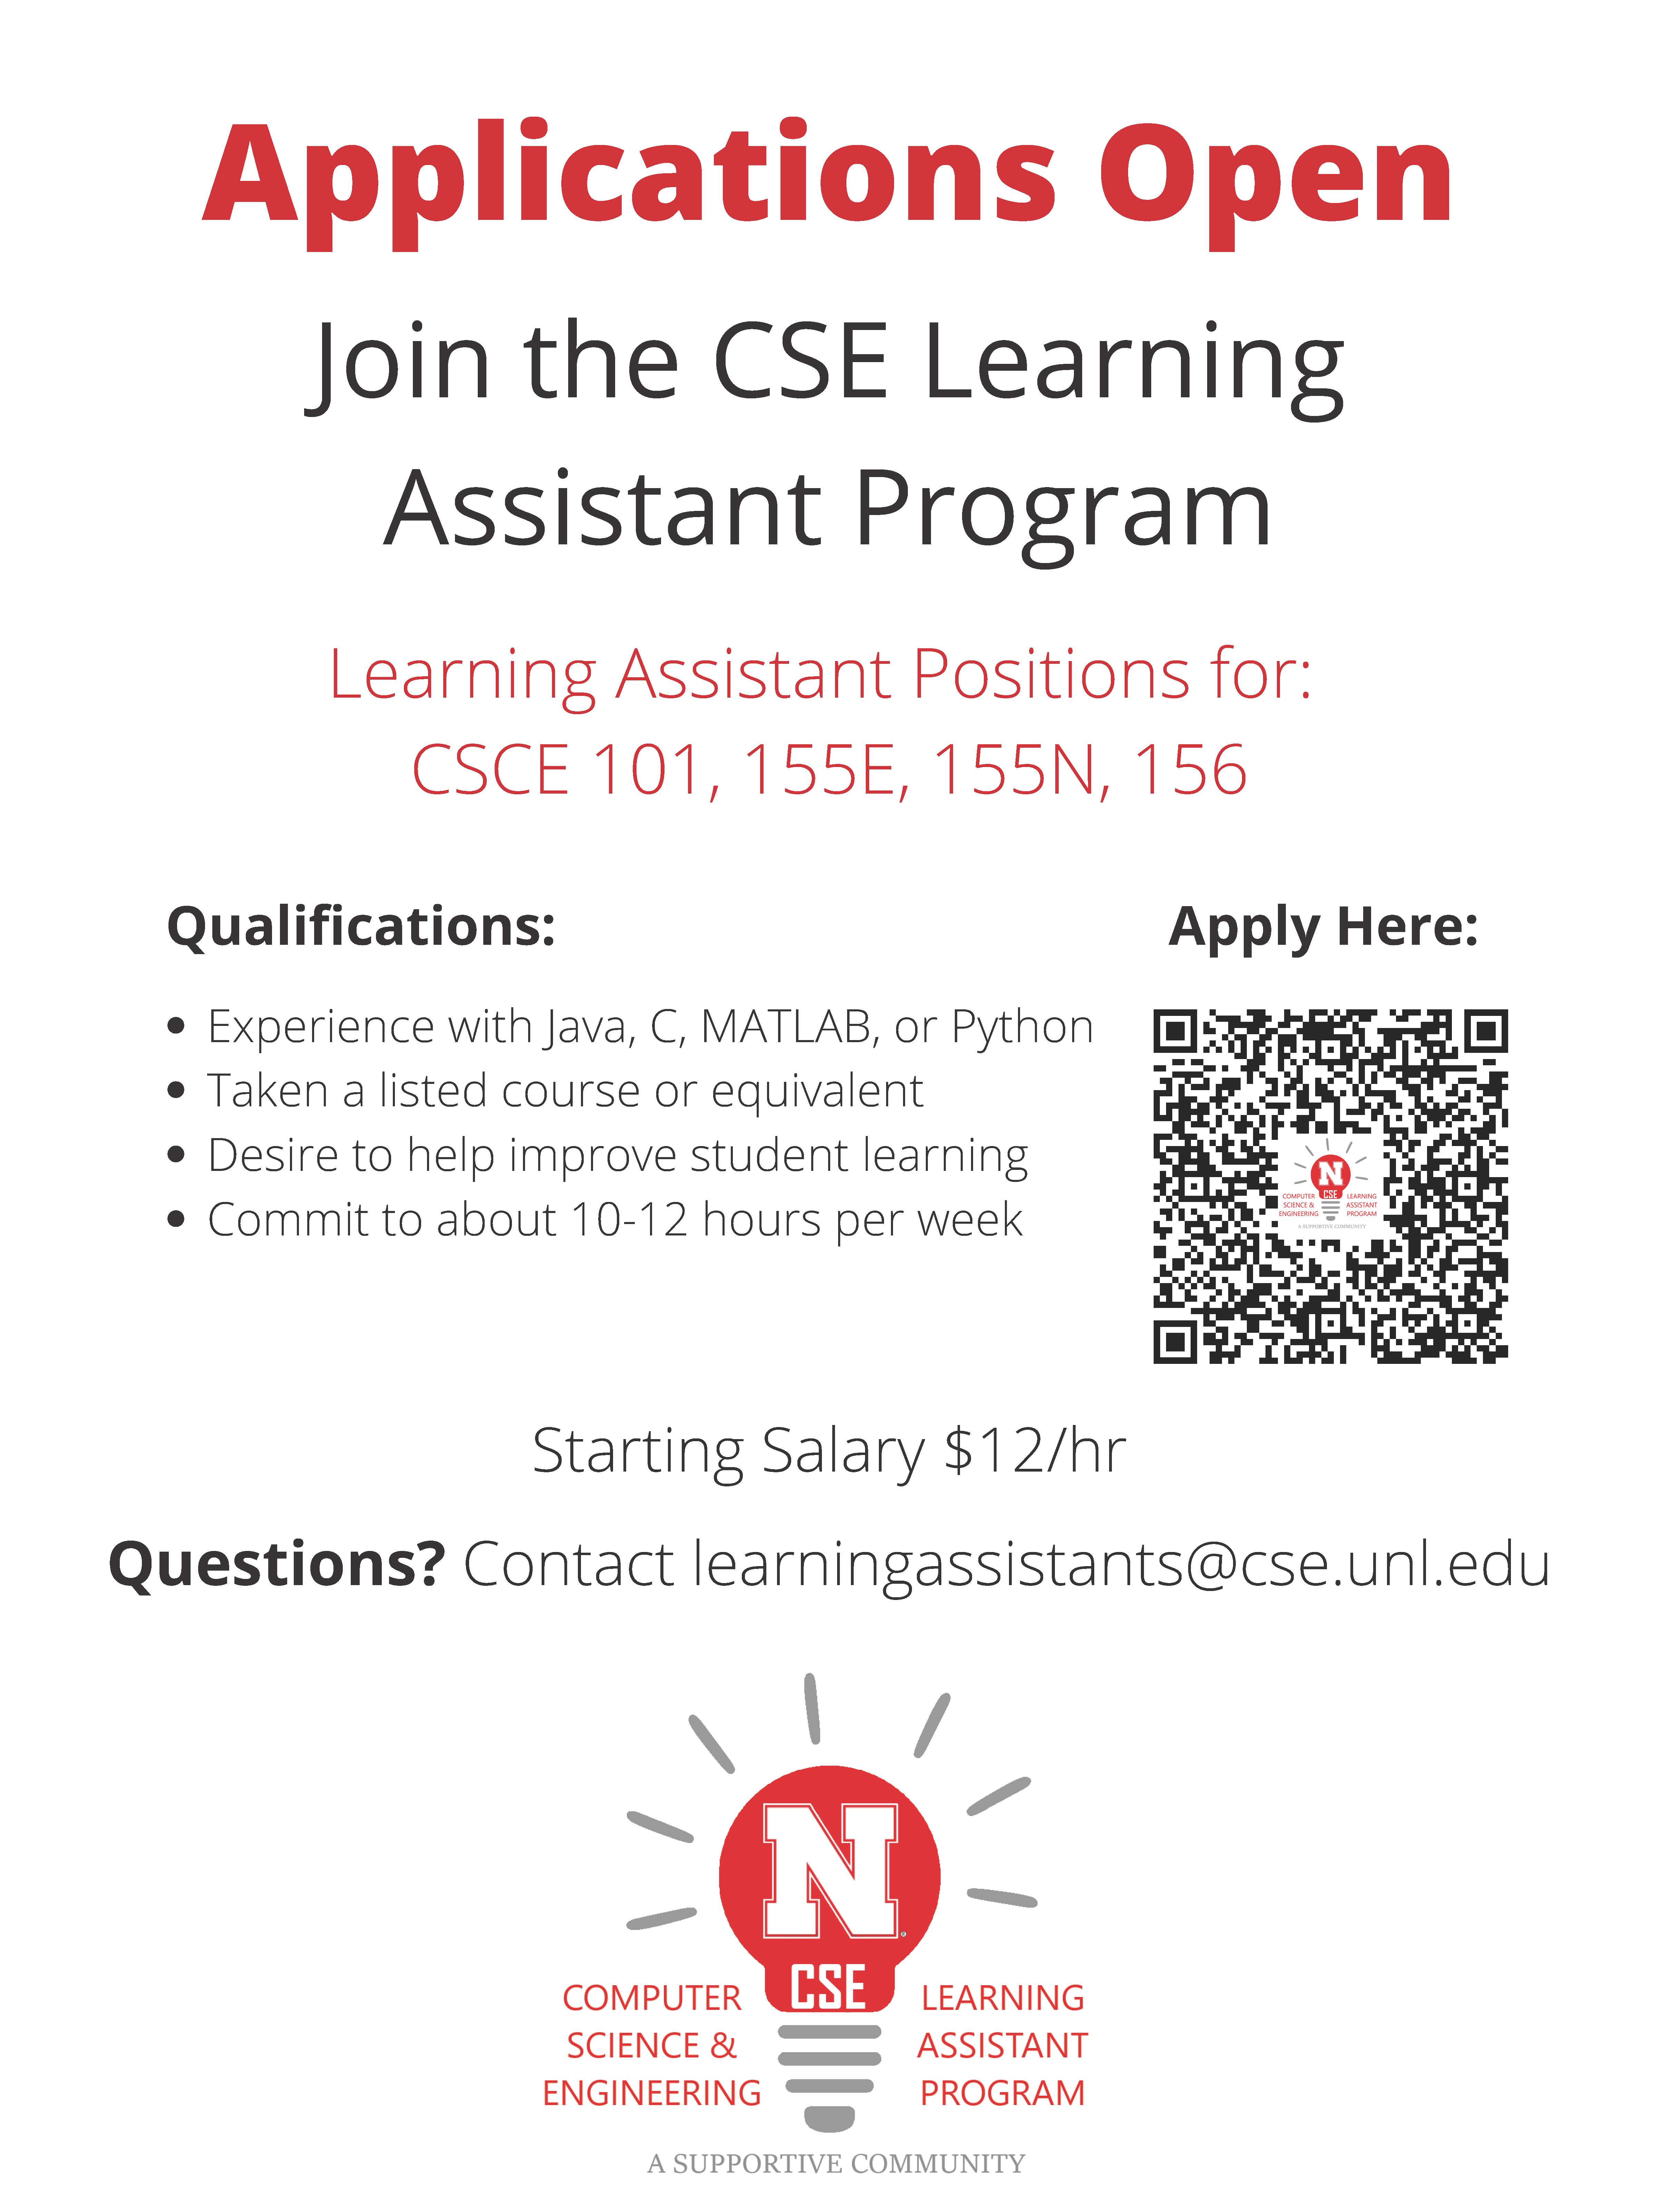 The Learning Assistant Program